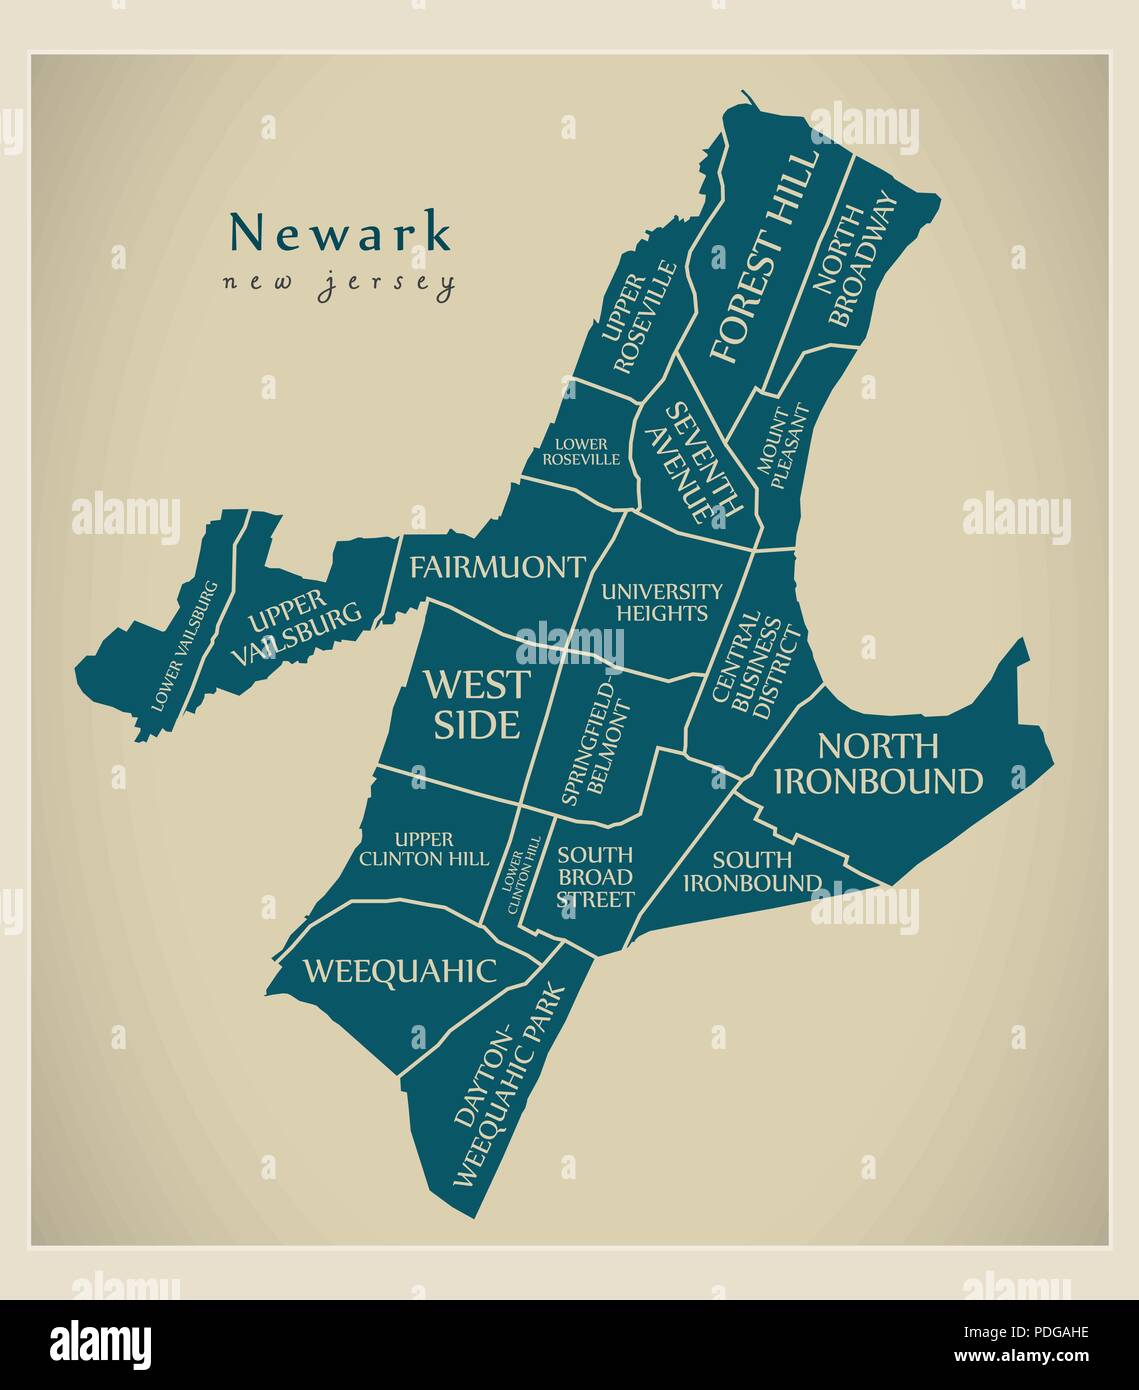 Modern City Map Newark New Jersey City Of The Usa With Neighborhoods And Titles PDGAHE 